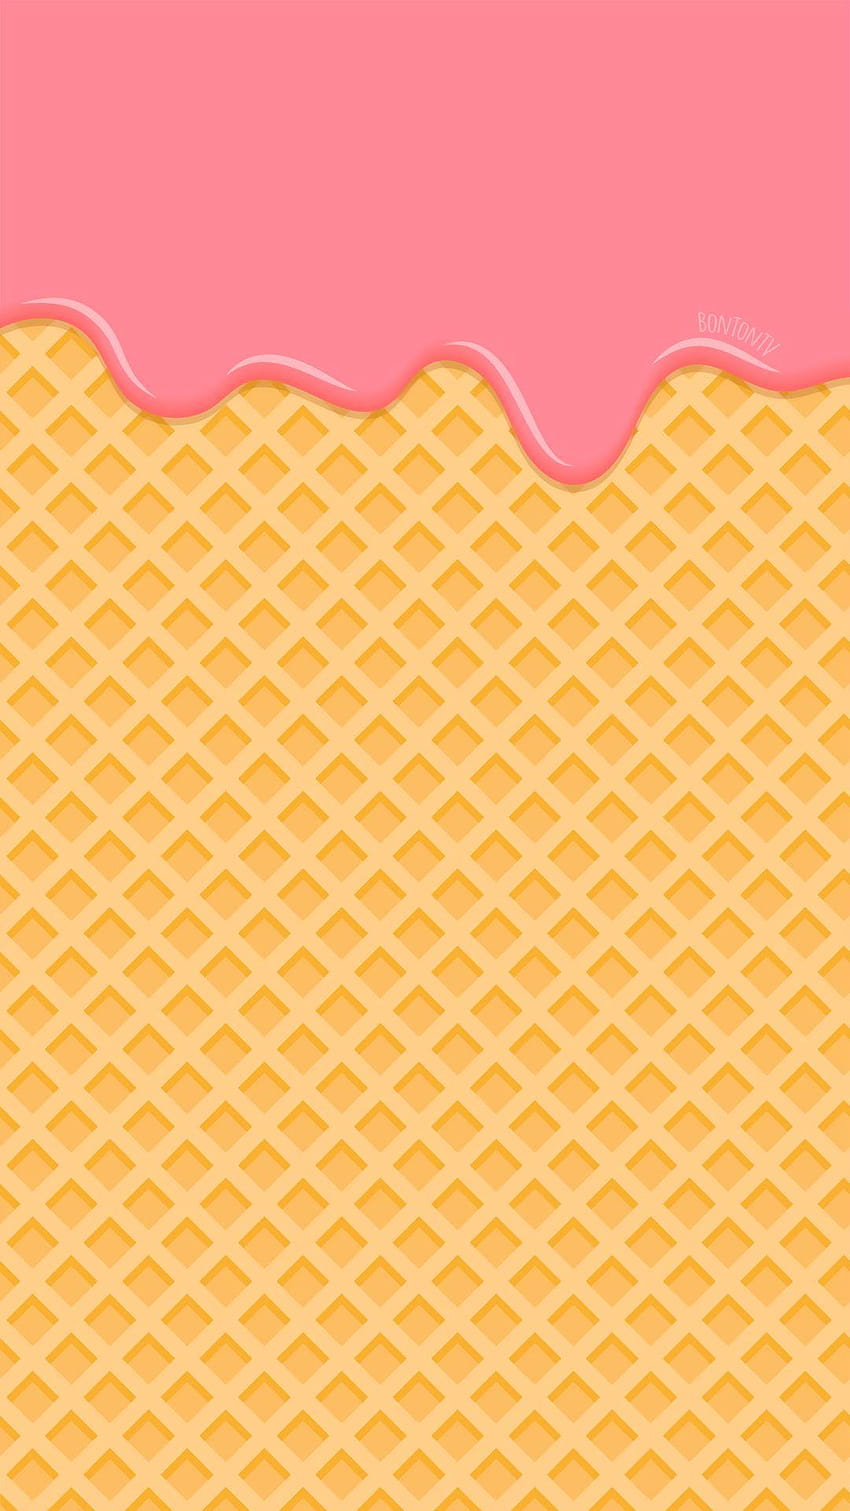 Phone Pink Melted Ice Cream on Waffle, ice cream melting HD phone wallpaper